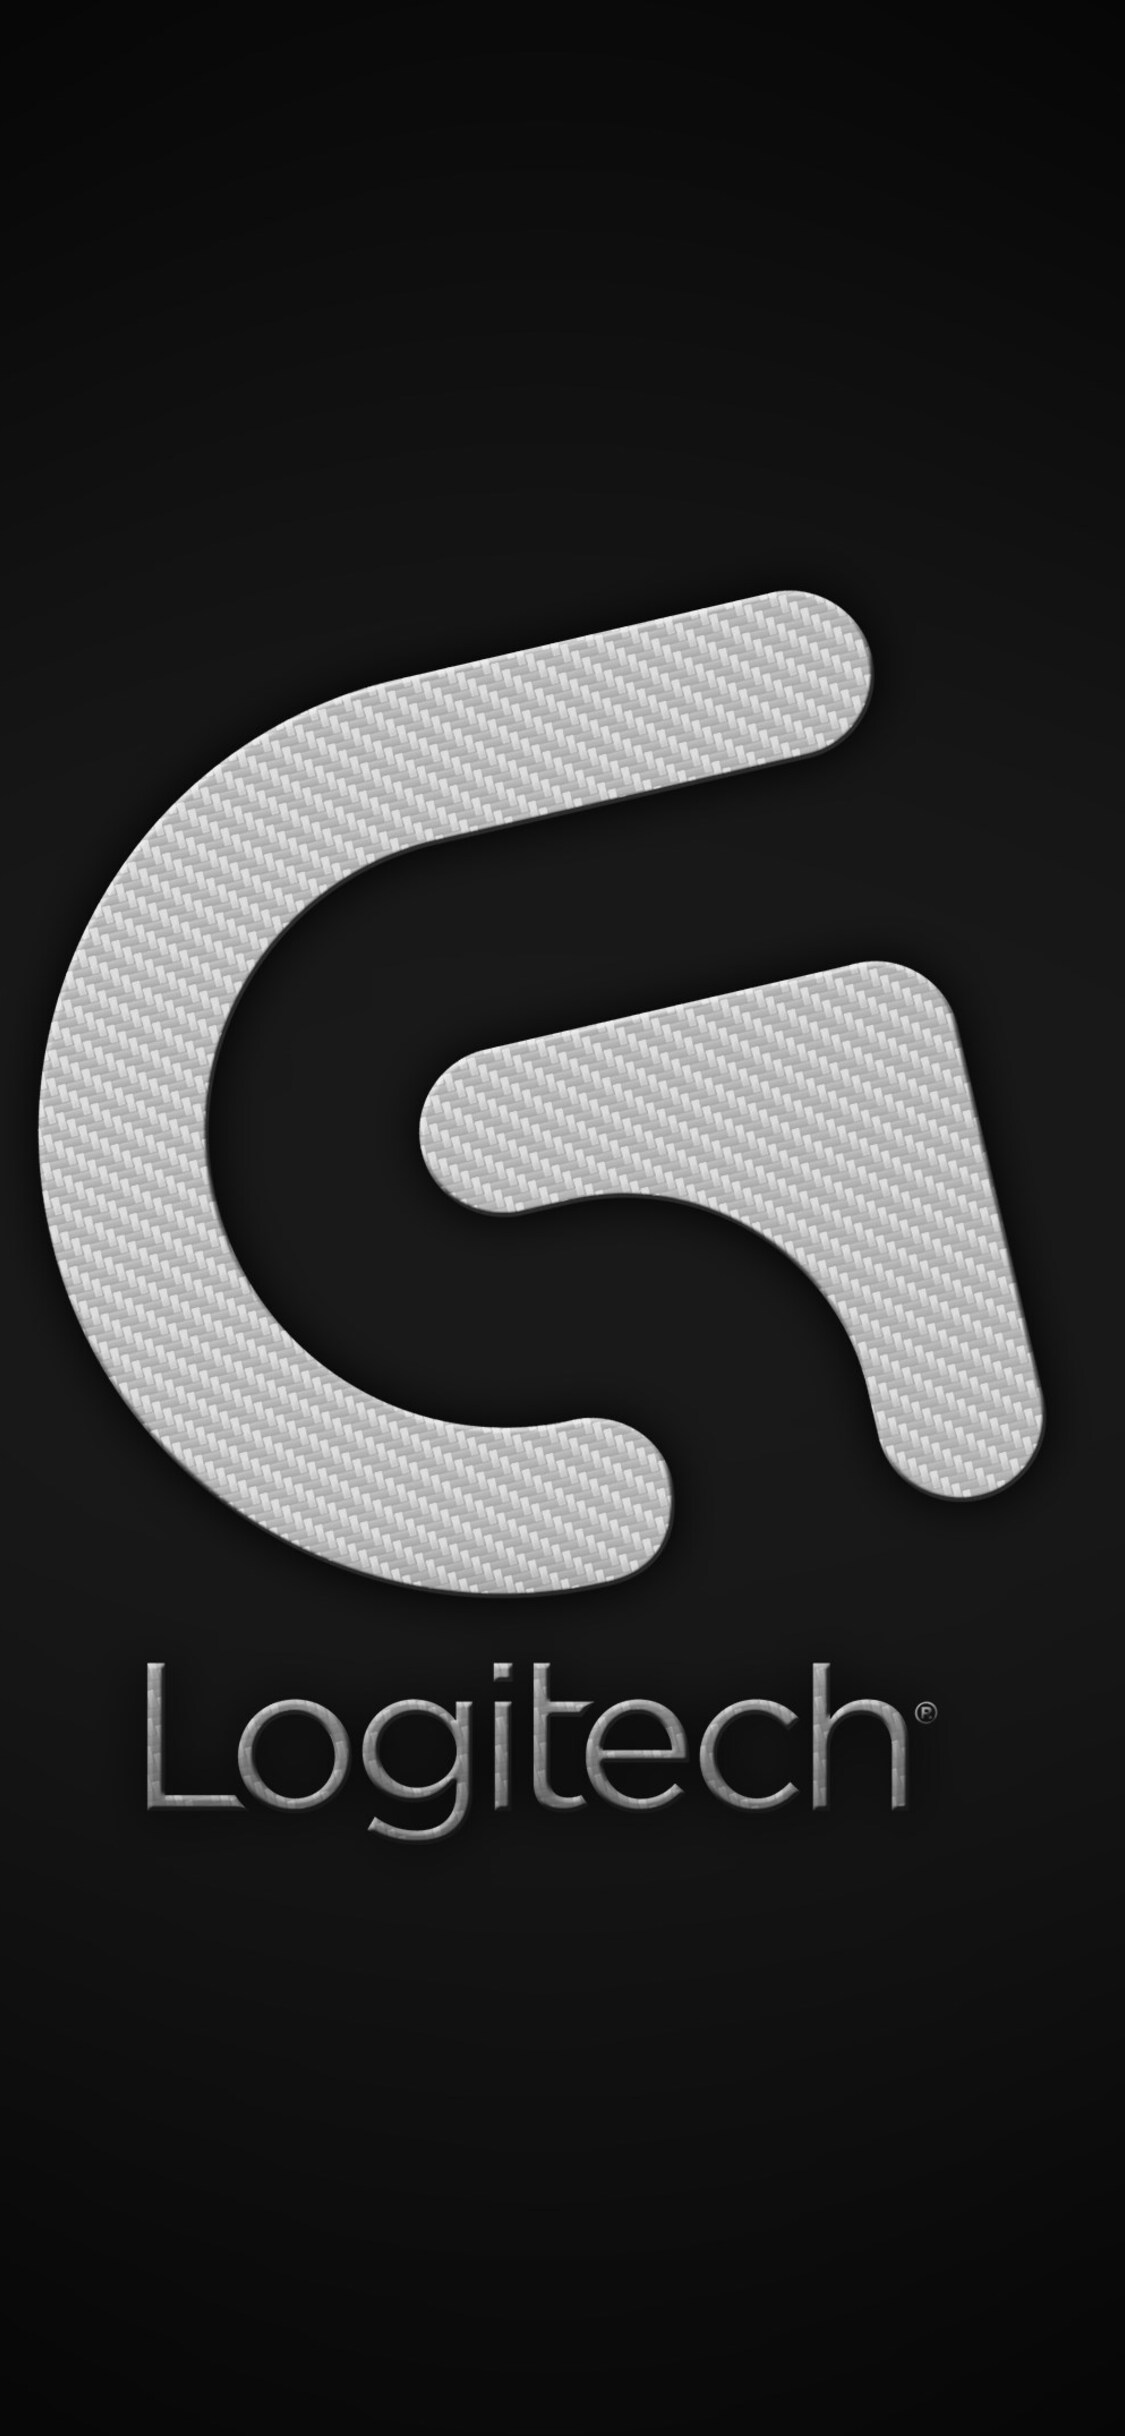 1125x2436 Logitech Brand Logo Iphone Xs Iphone 10 Iphone X Hd 4k Wallpapers Images Backgrounds Photos And Pictures